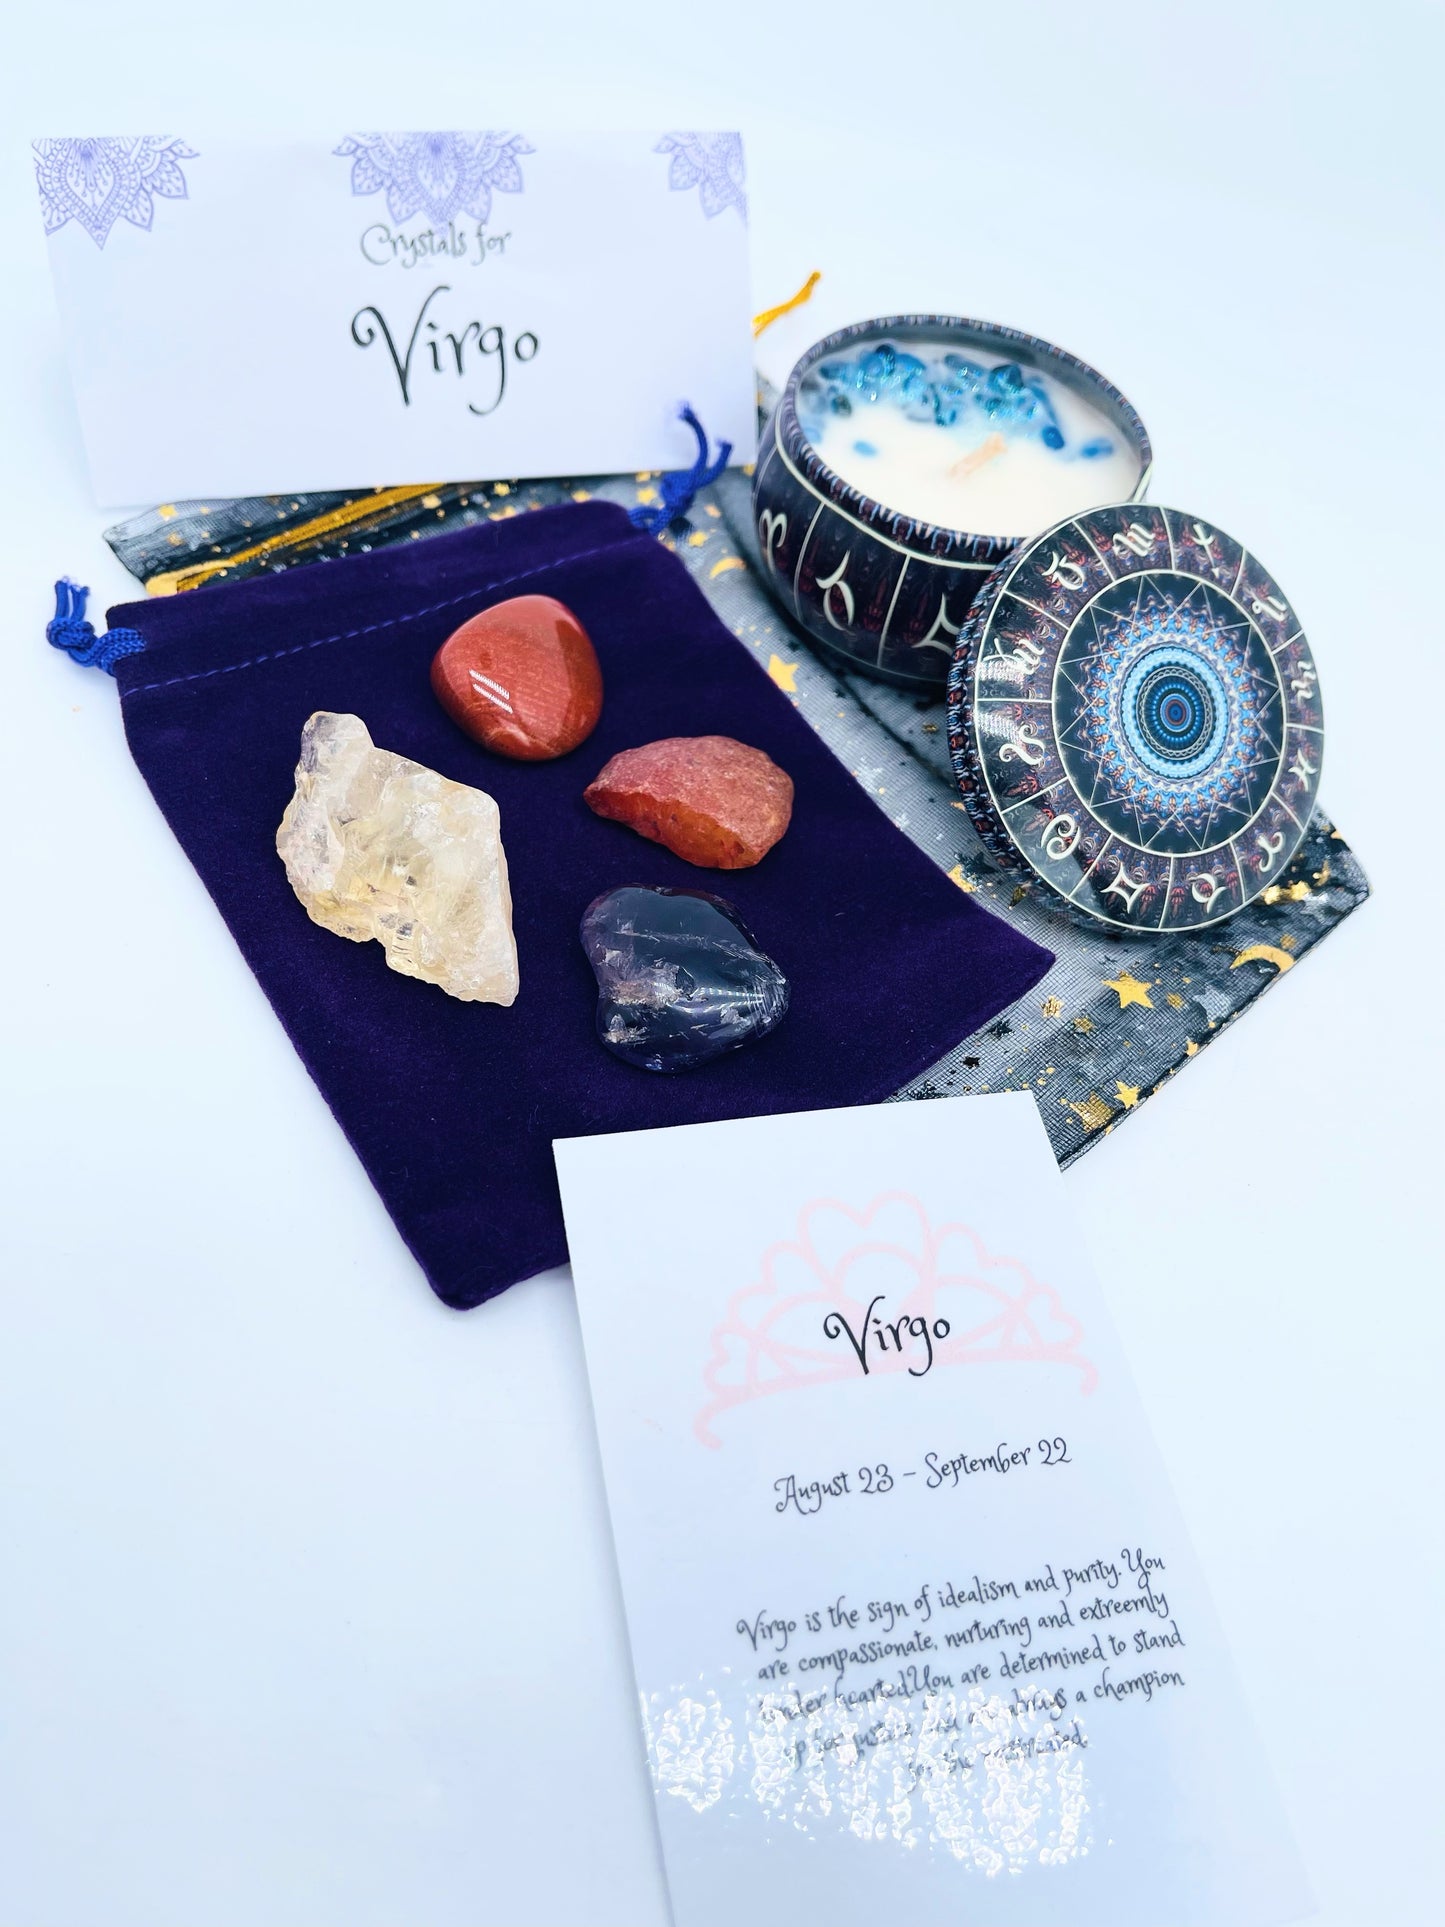 Virgo zodiac candle gift set with candle and four crystals for this sign sitting on a velvet bag.